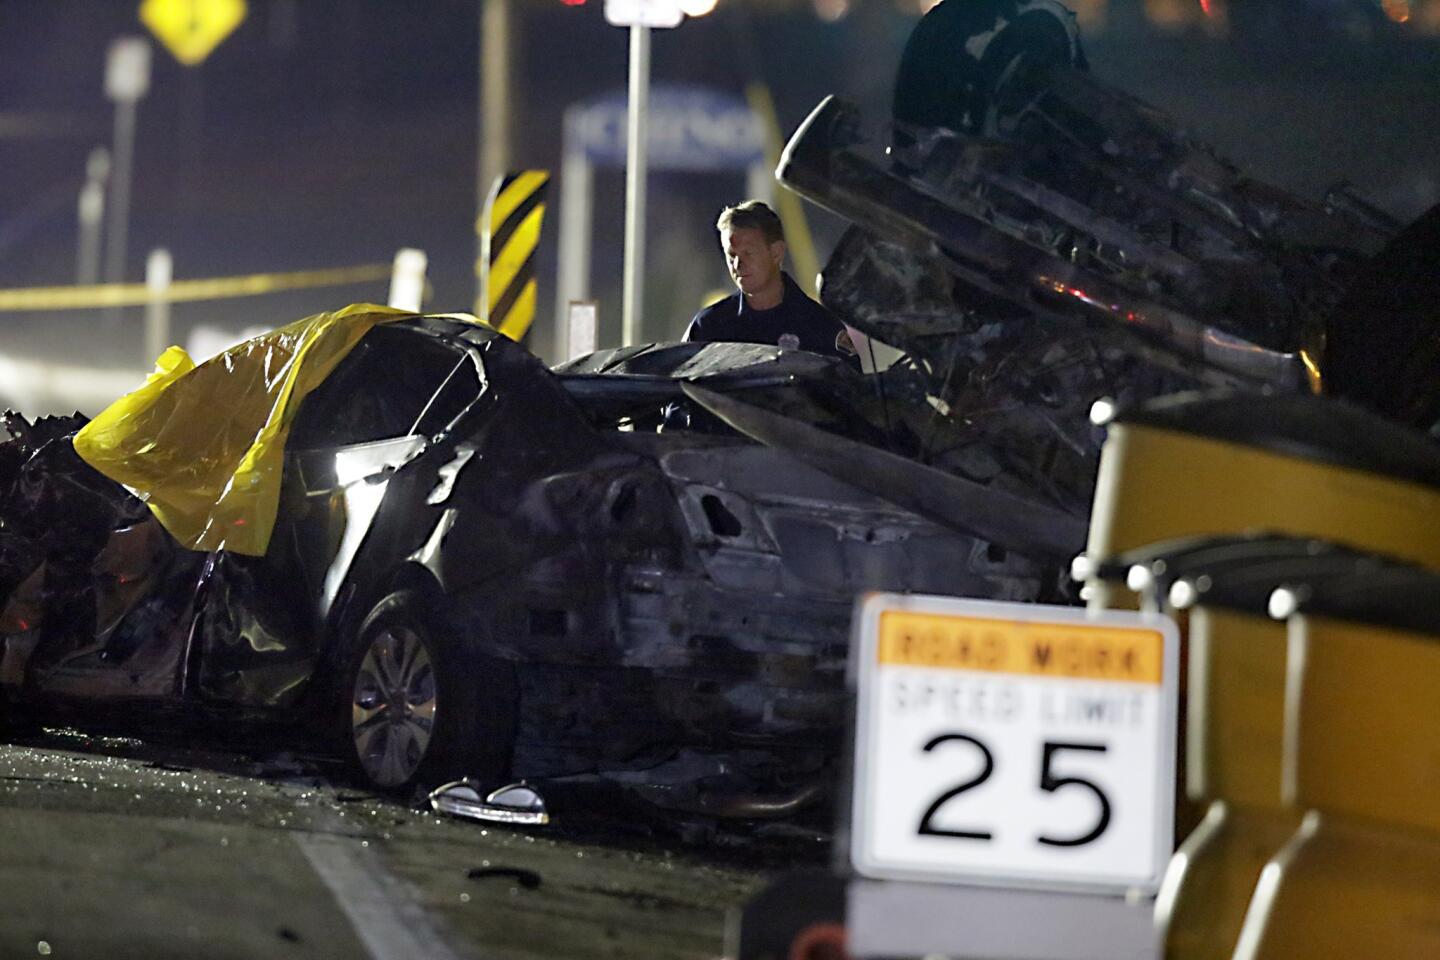 An official examines the charred wreckage after a fatal three-car crash in Chino.